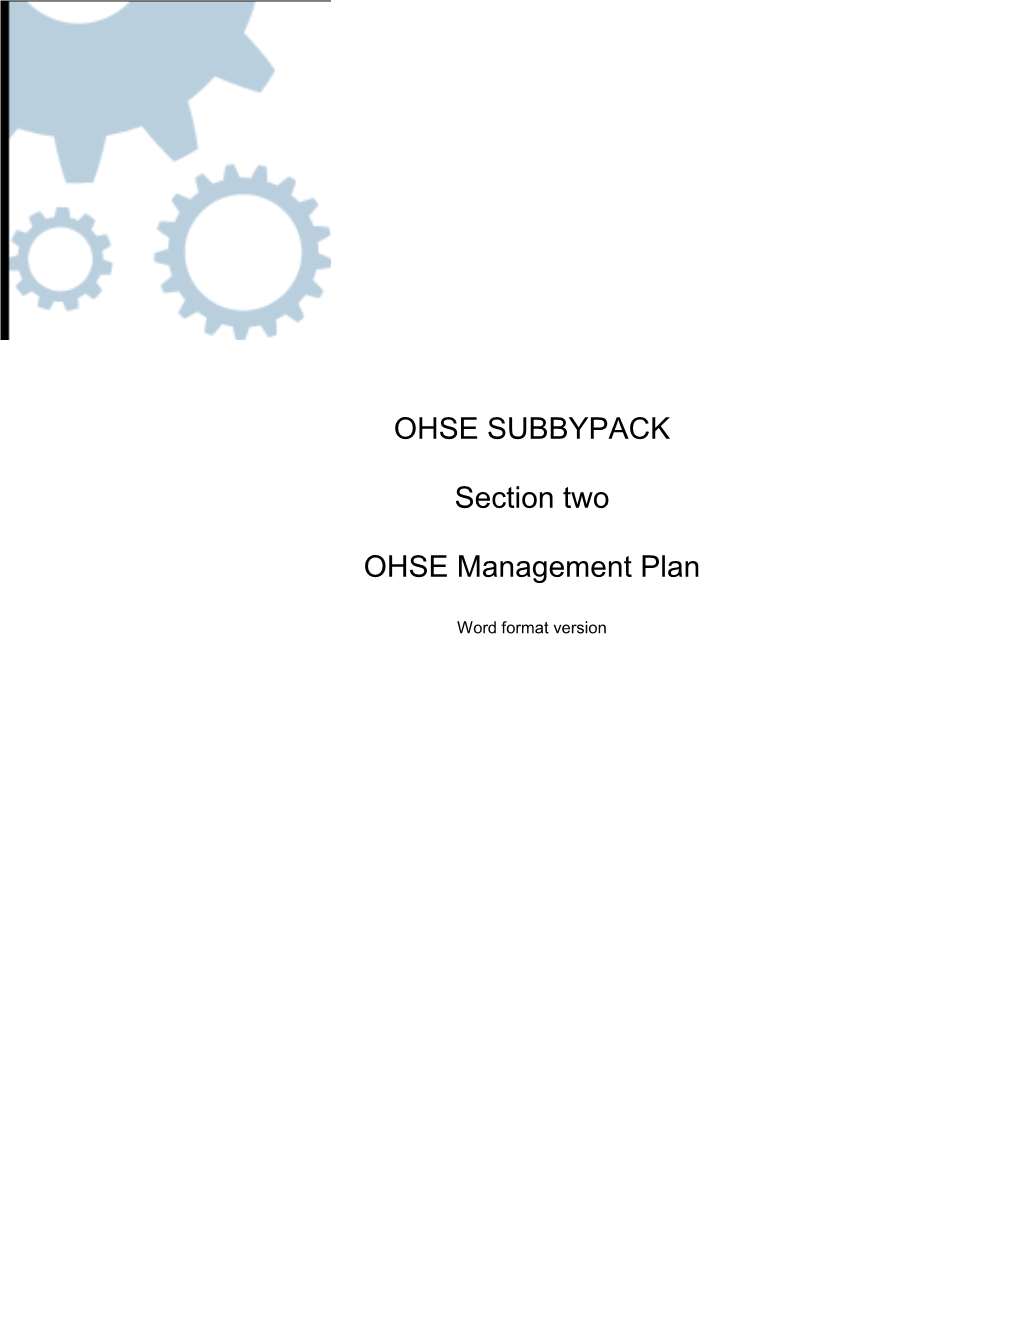 OHSE Management Plan